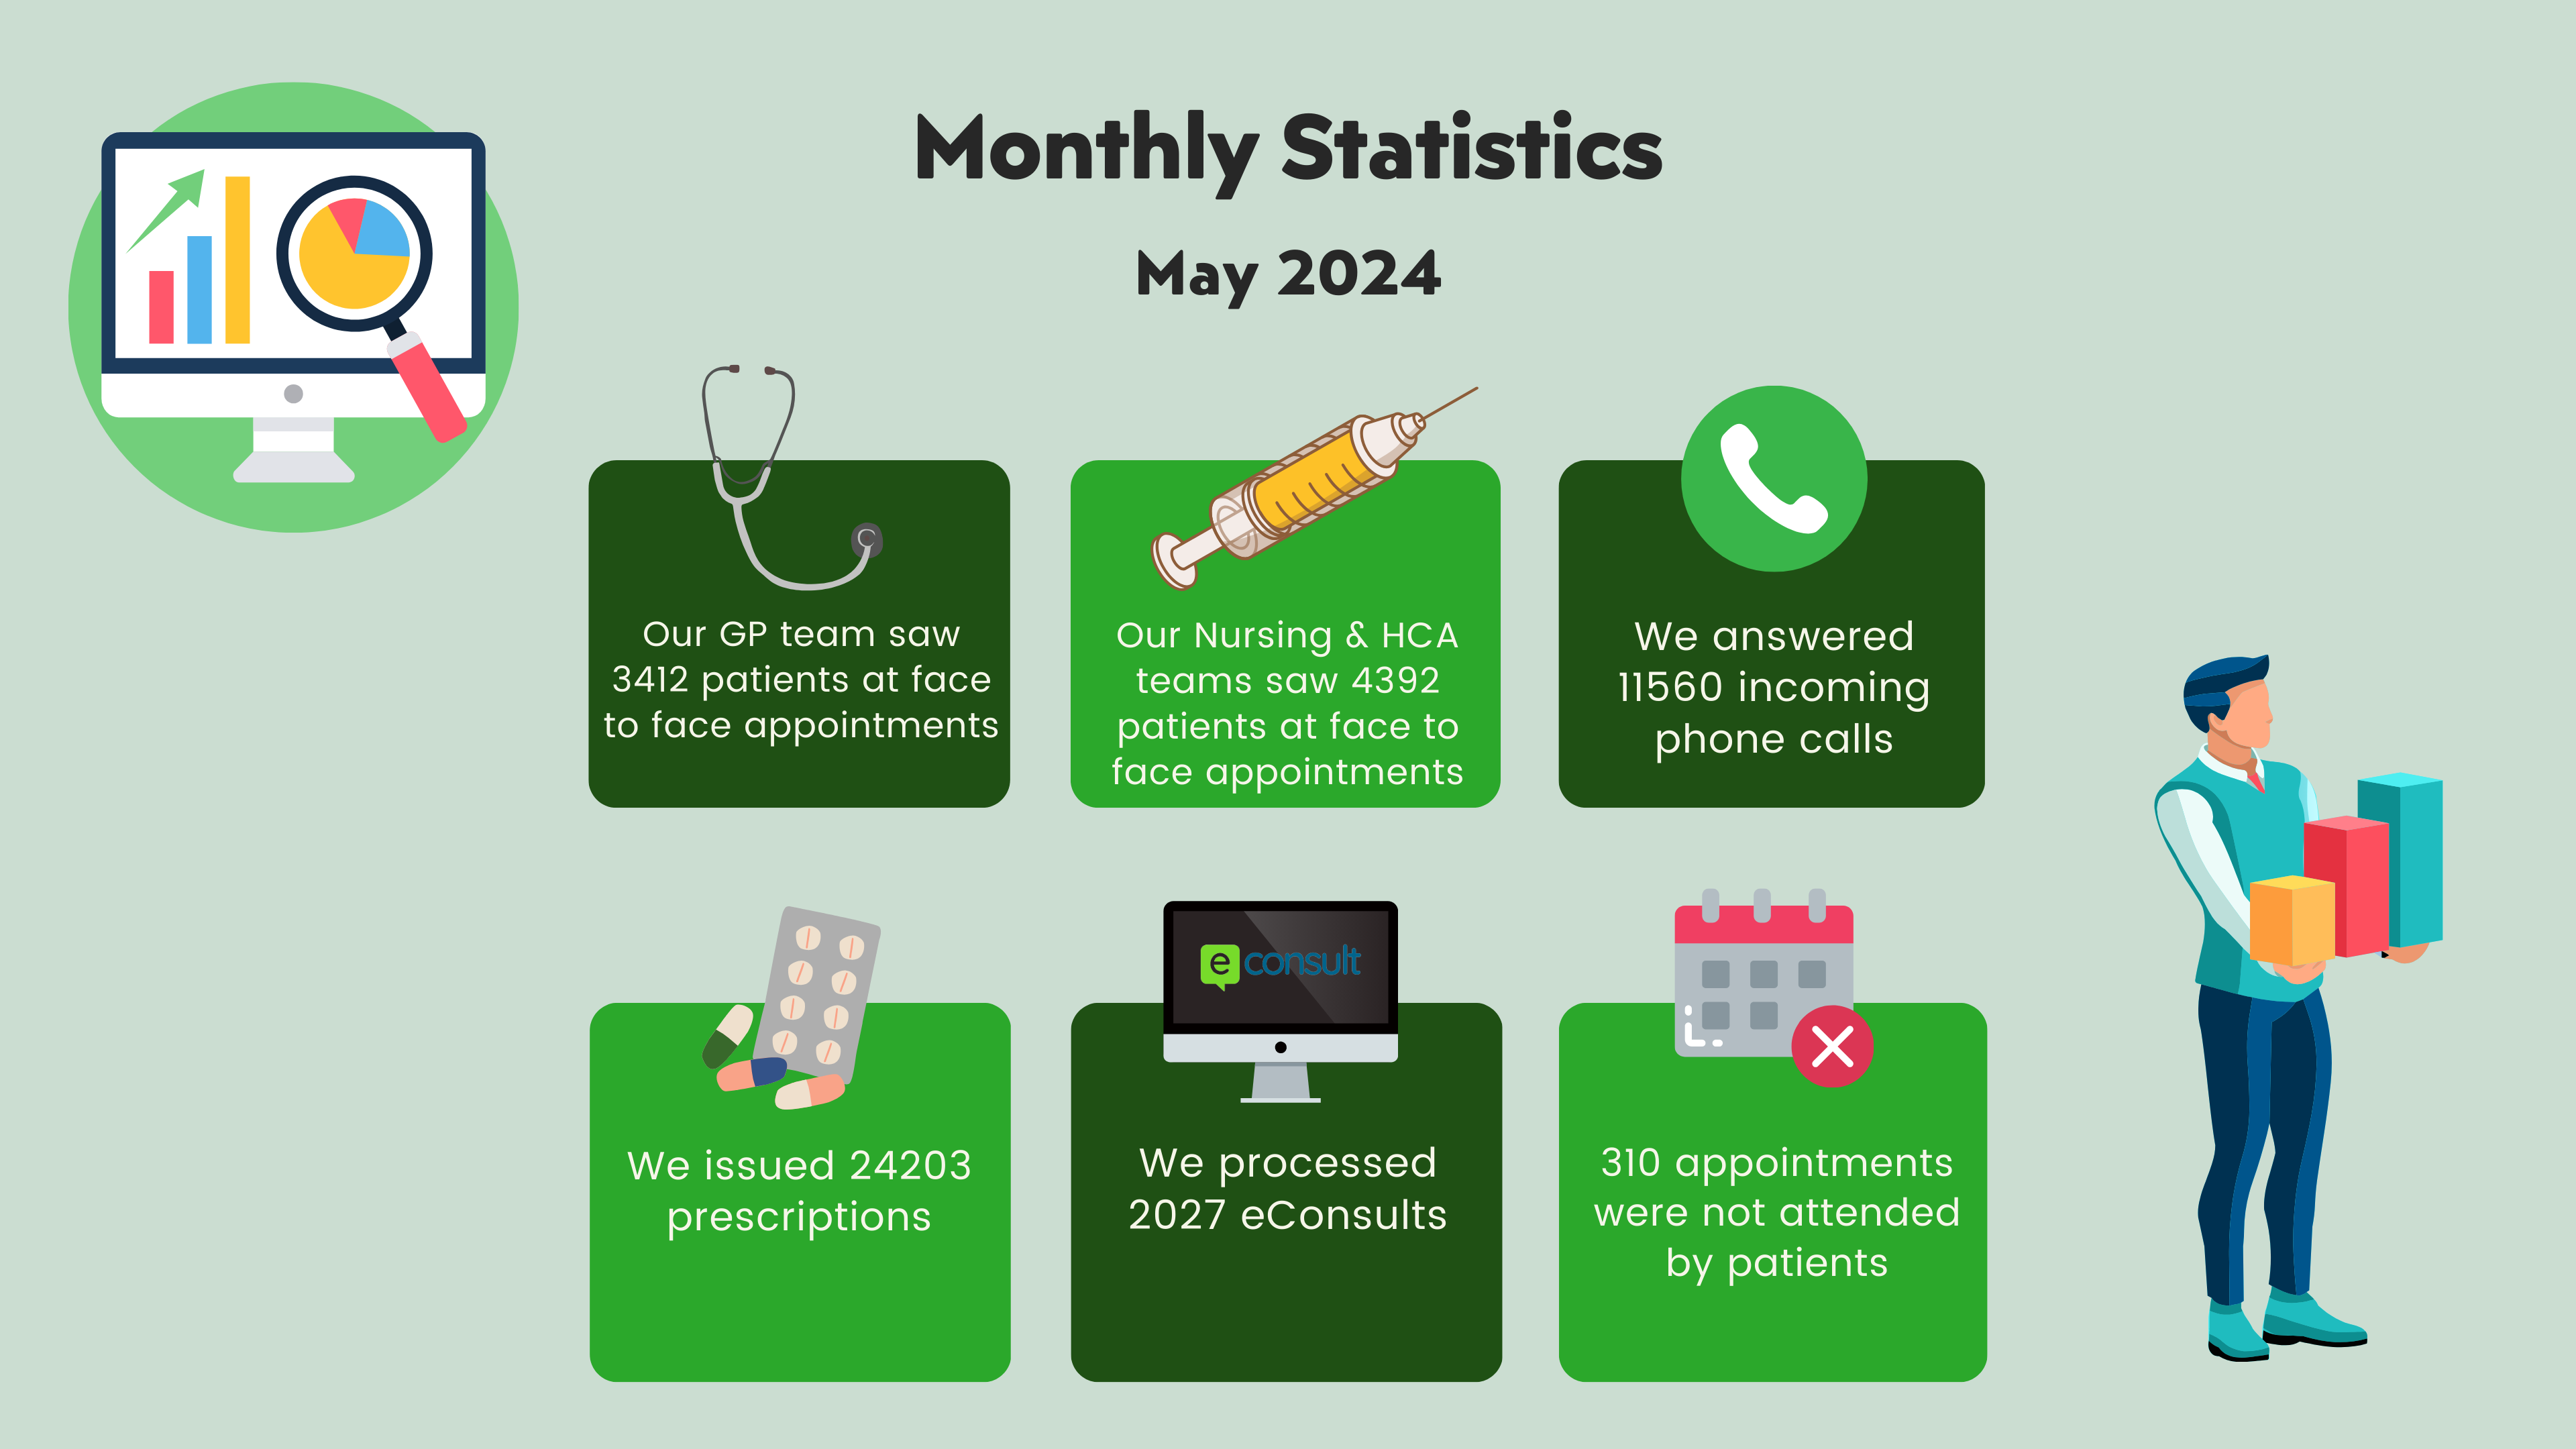 monthly-stats-may-2024-3840-2160-px